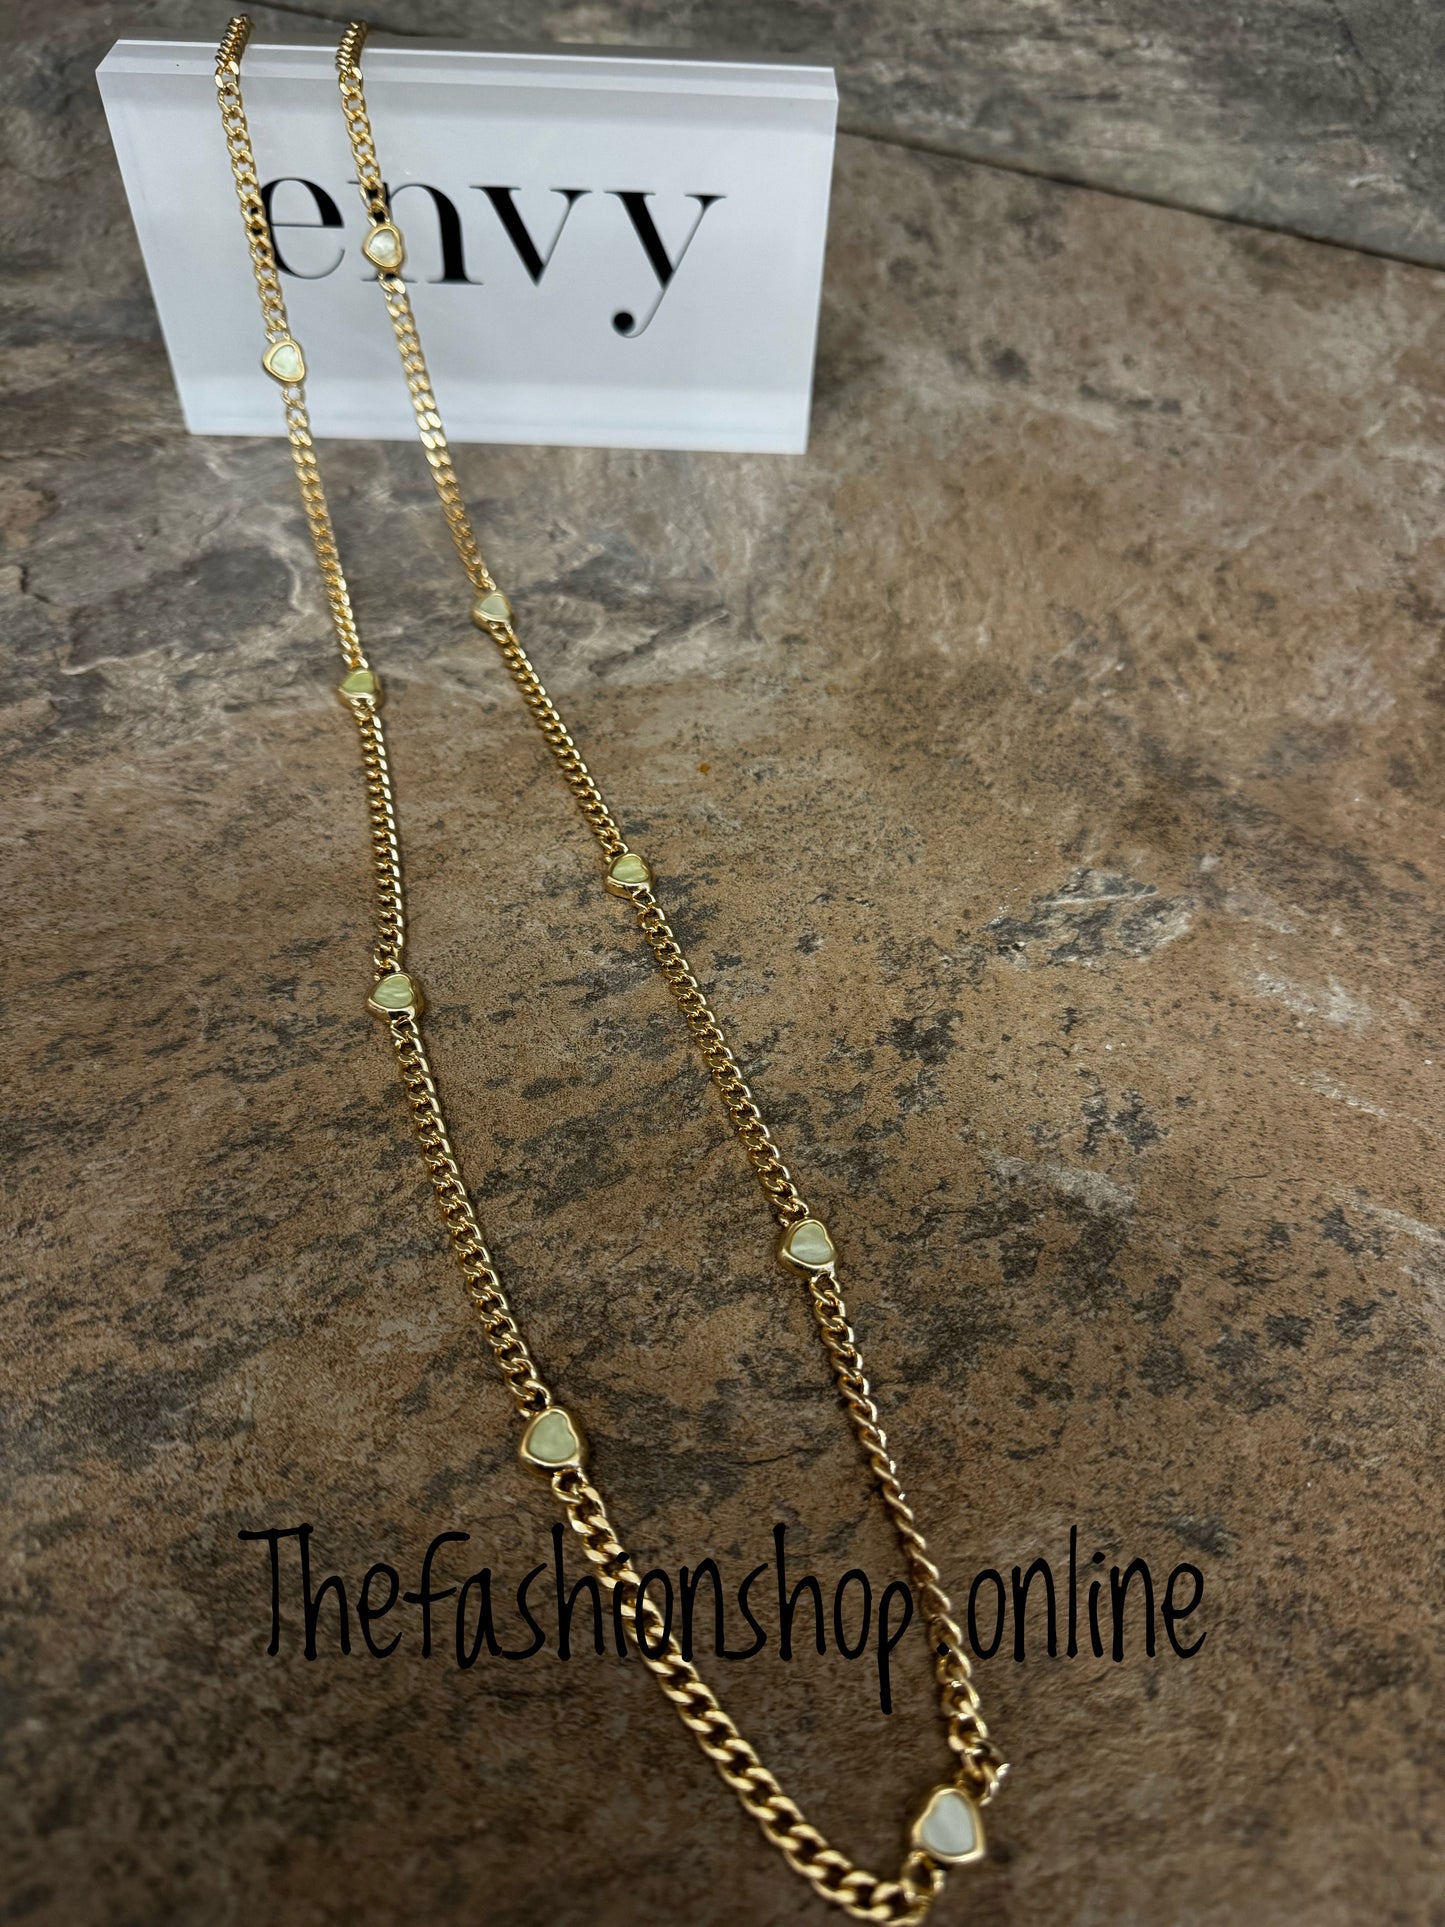 Envy long gold curb necklace with small pale green hearts